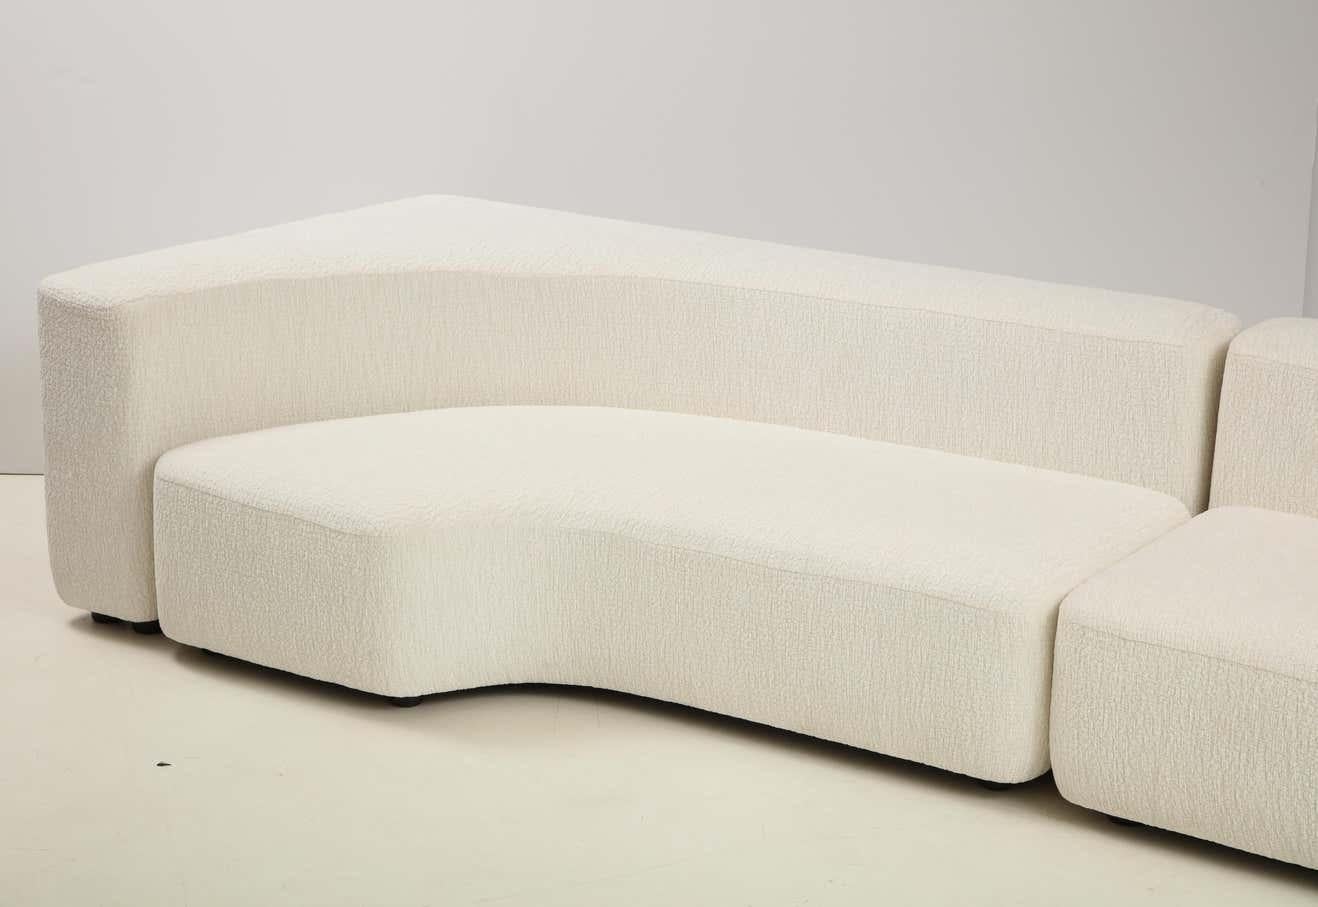 Bouclé Ivory Boucle Sofa Attributed to Pamio, Massari & Toso for Stillwood, Italy, 1960